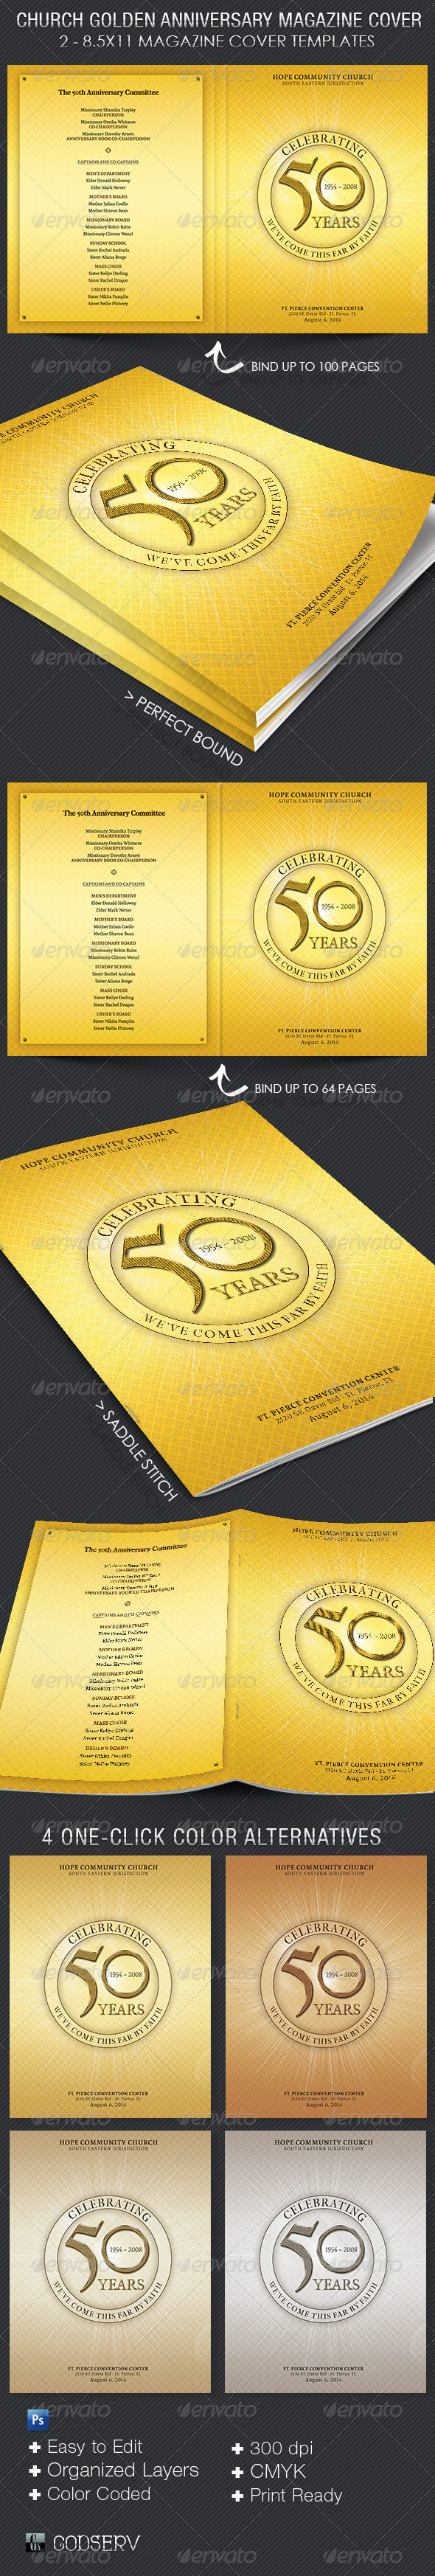 Church golden anniversary magazine cover template preview